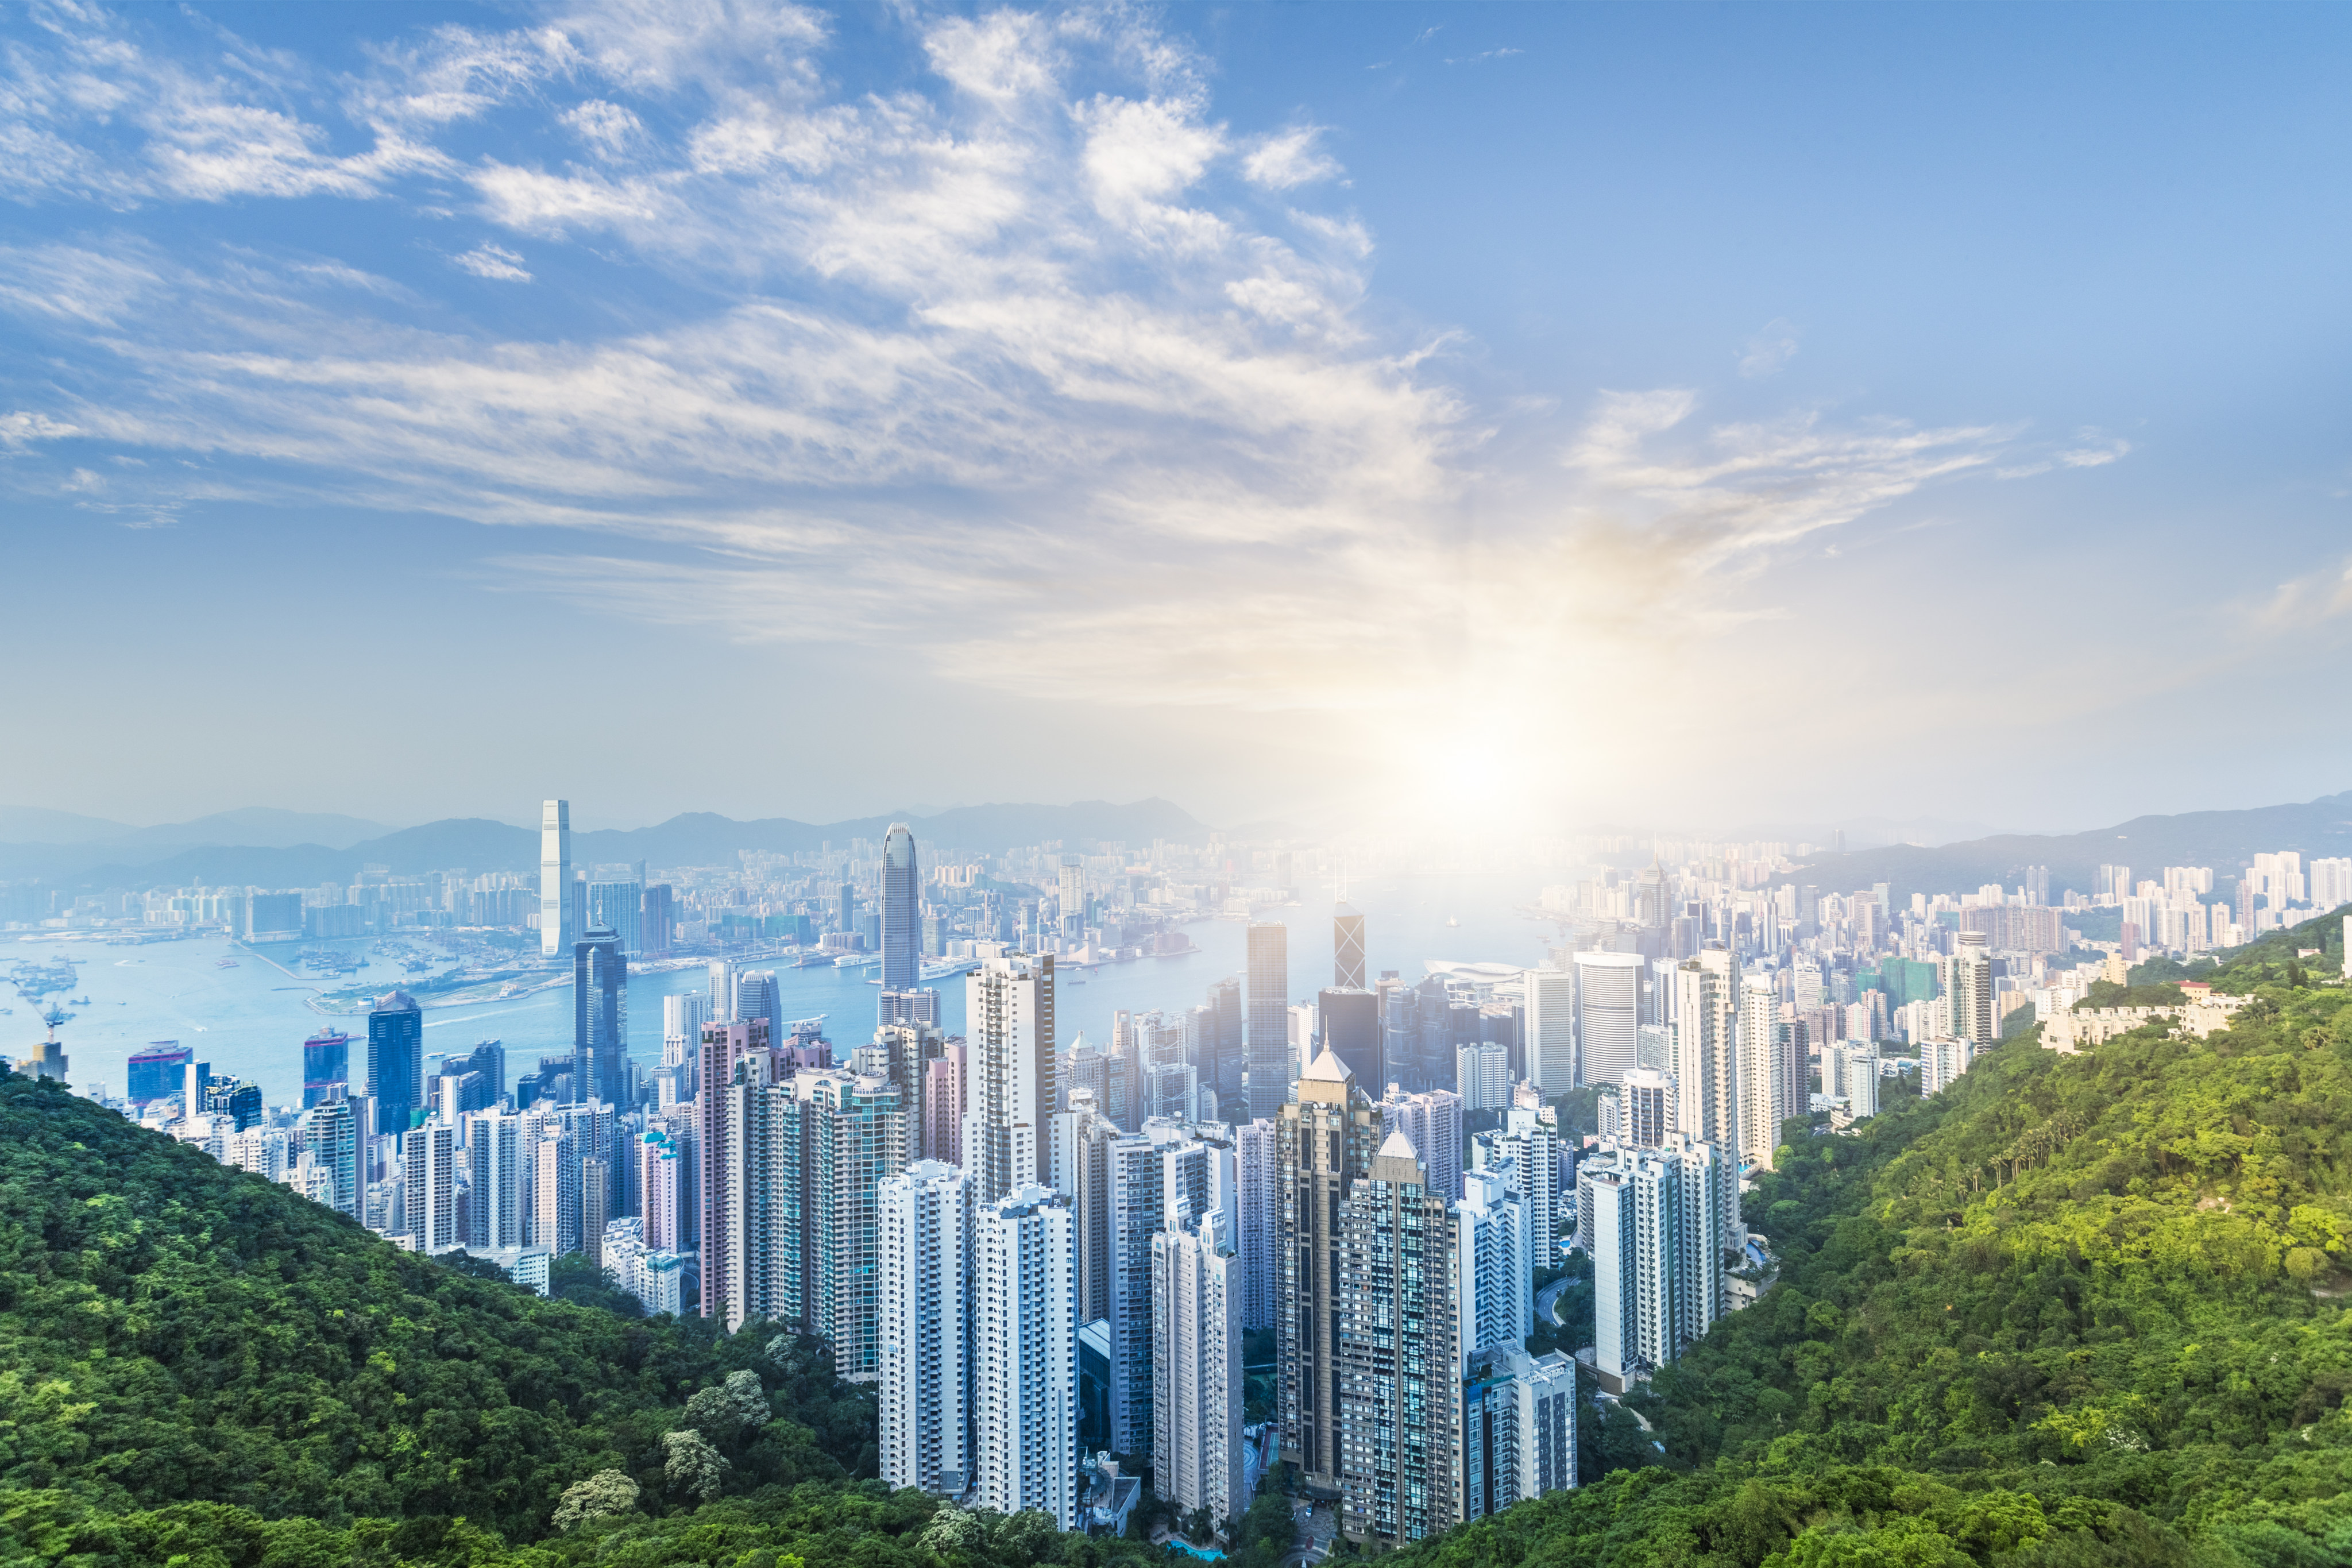 Hong Kong aims to achieve net-zero emissions by 2050. Photo: Getty Images
